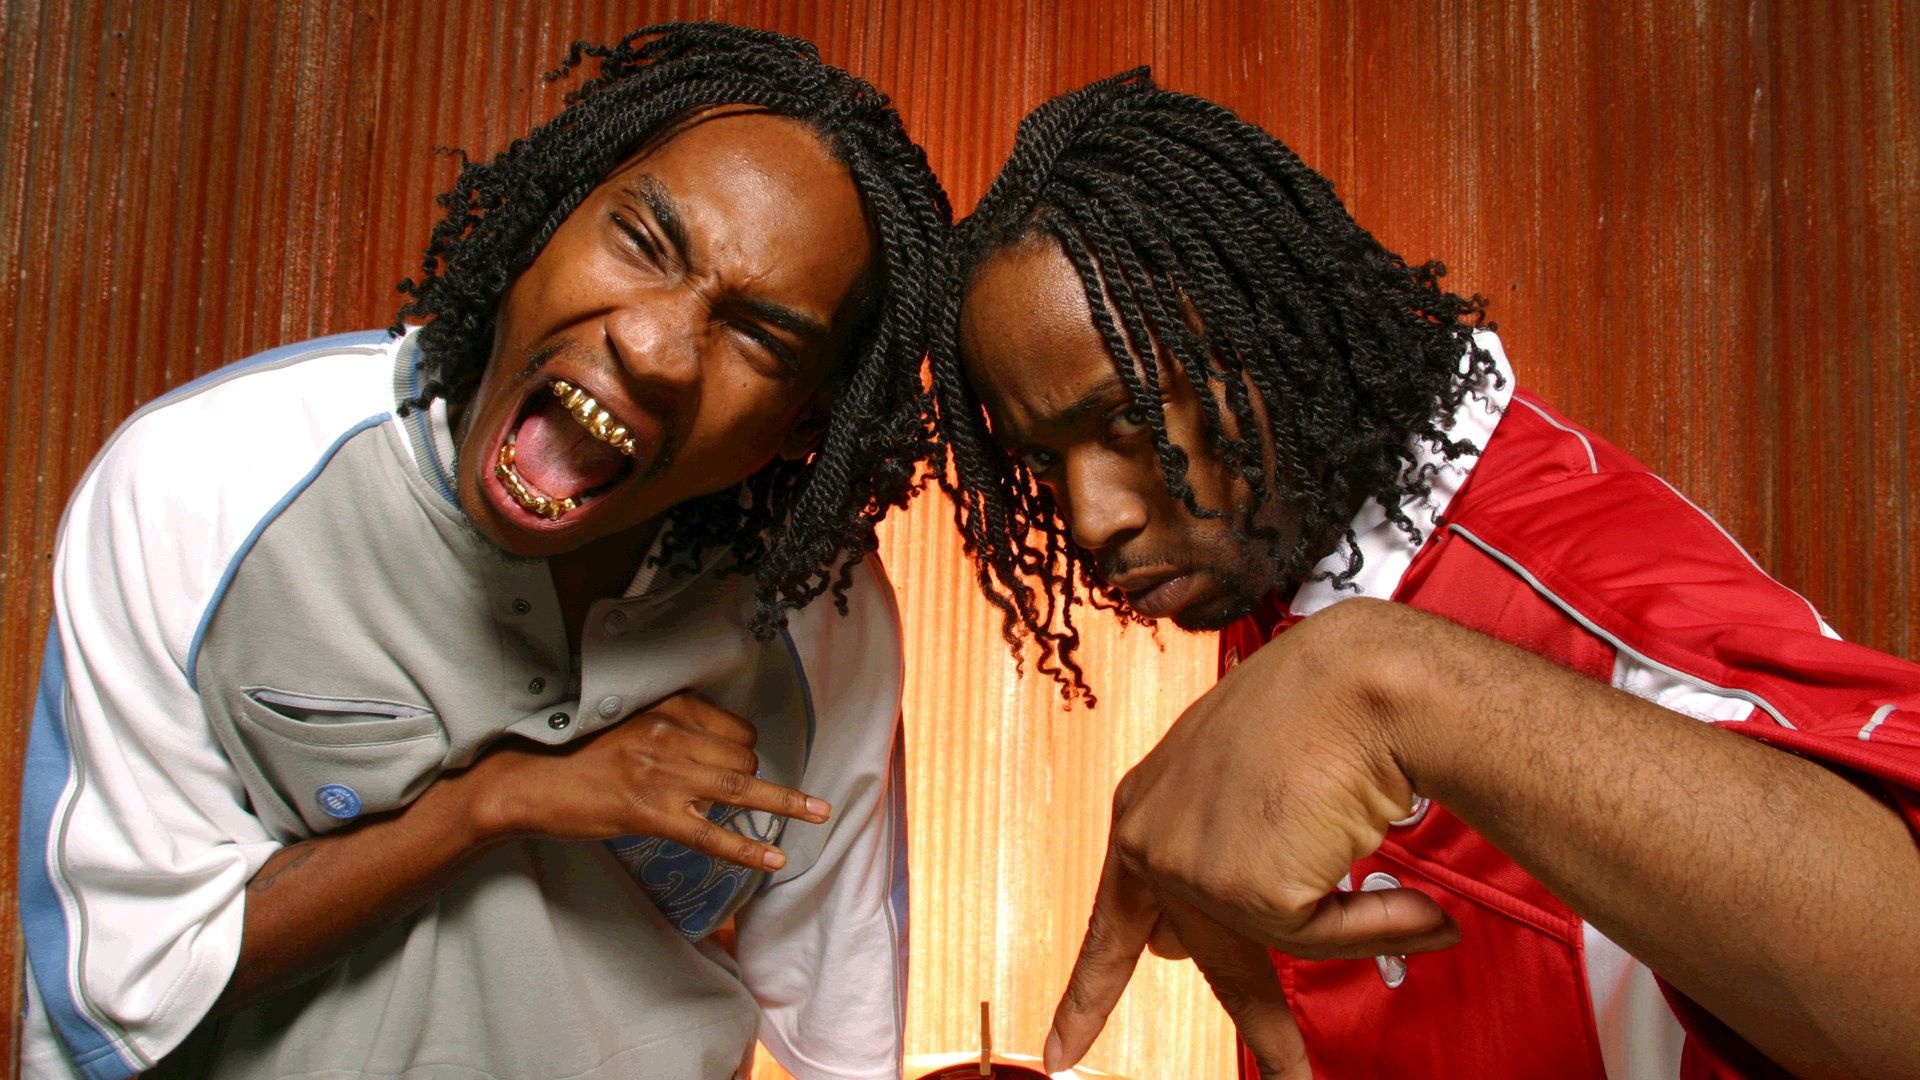 Ying Yang Twins, Exciting performance, High dive venue, Energetic duo, 1920x1080 Full HD Desktop